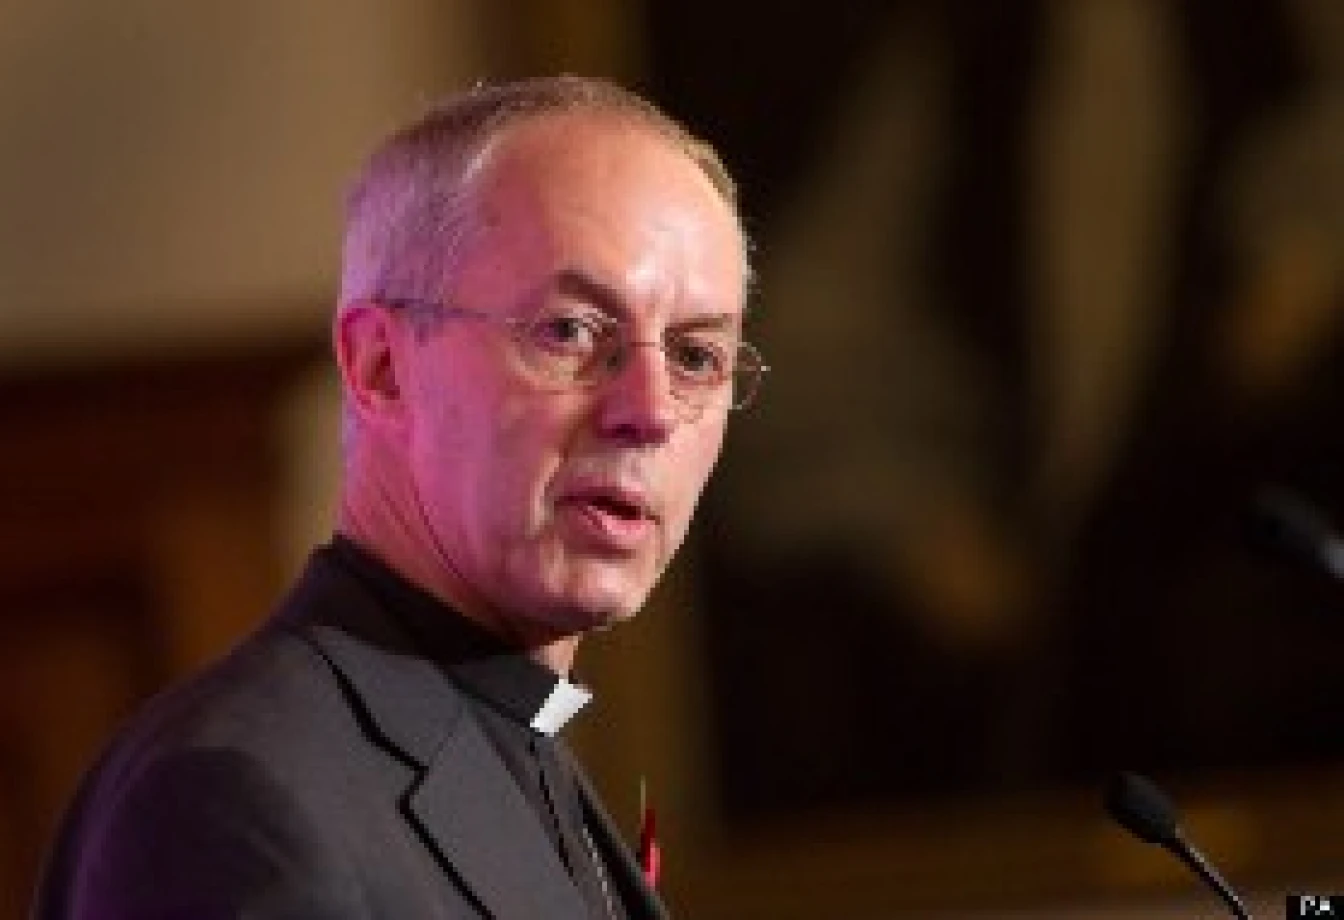 Peshawar Christians ‘crying out’ for justice, says Archbishop of Canterbury